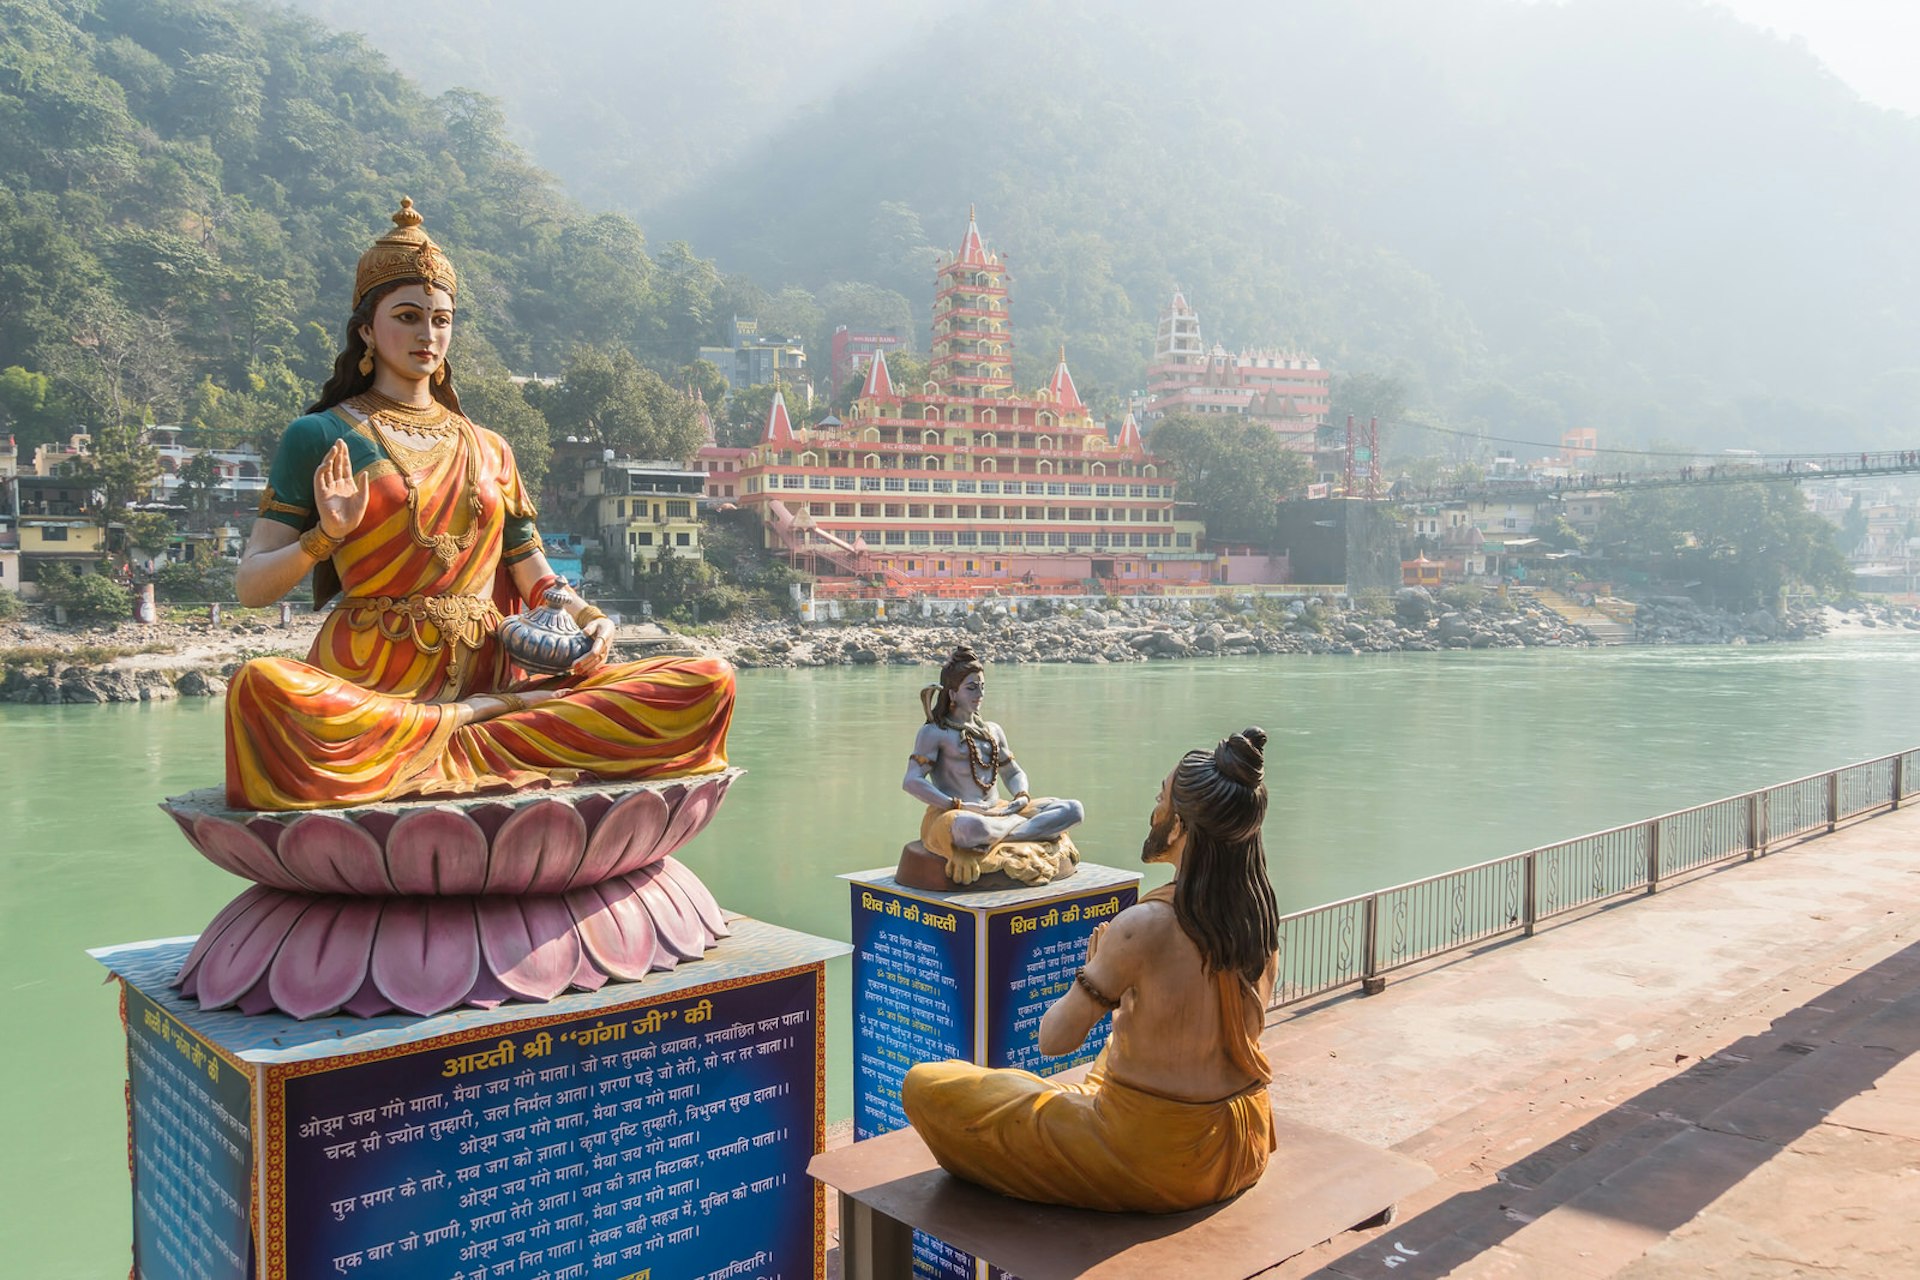 A statue of Shiva on the banks of the Ganges near Rishikesh